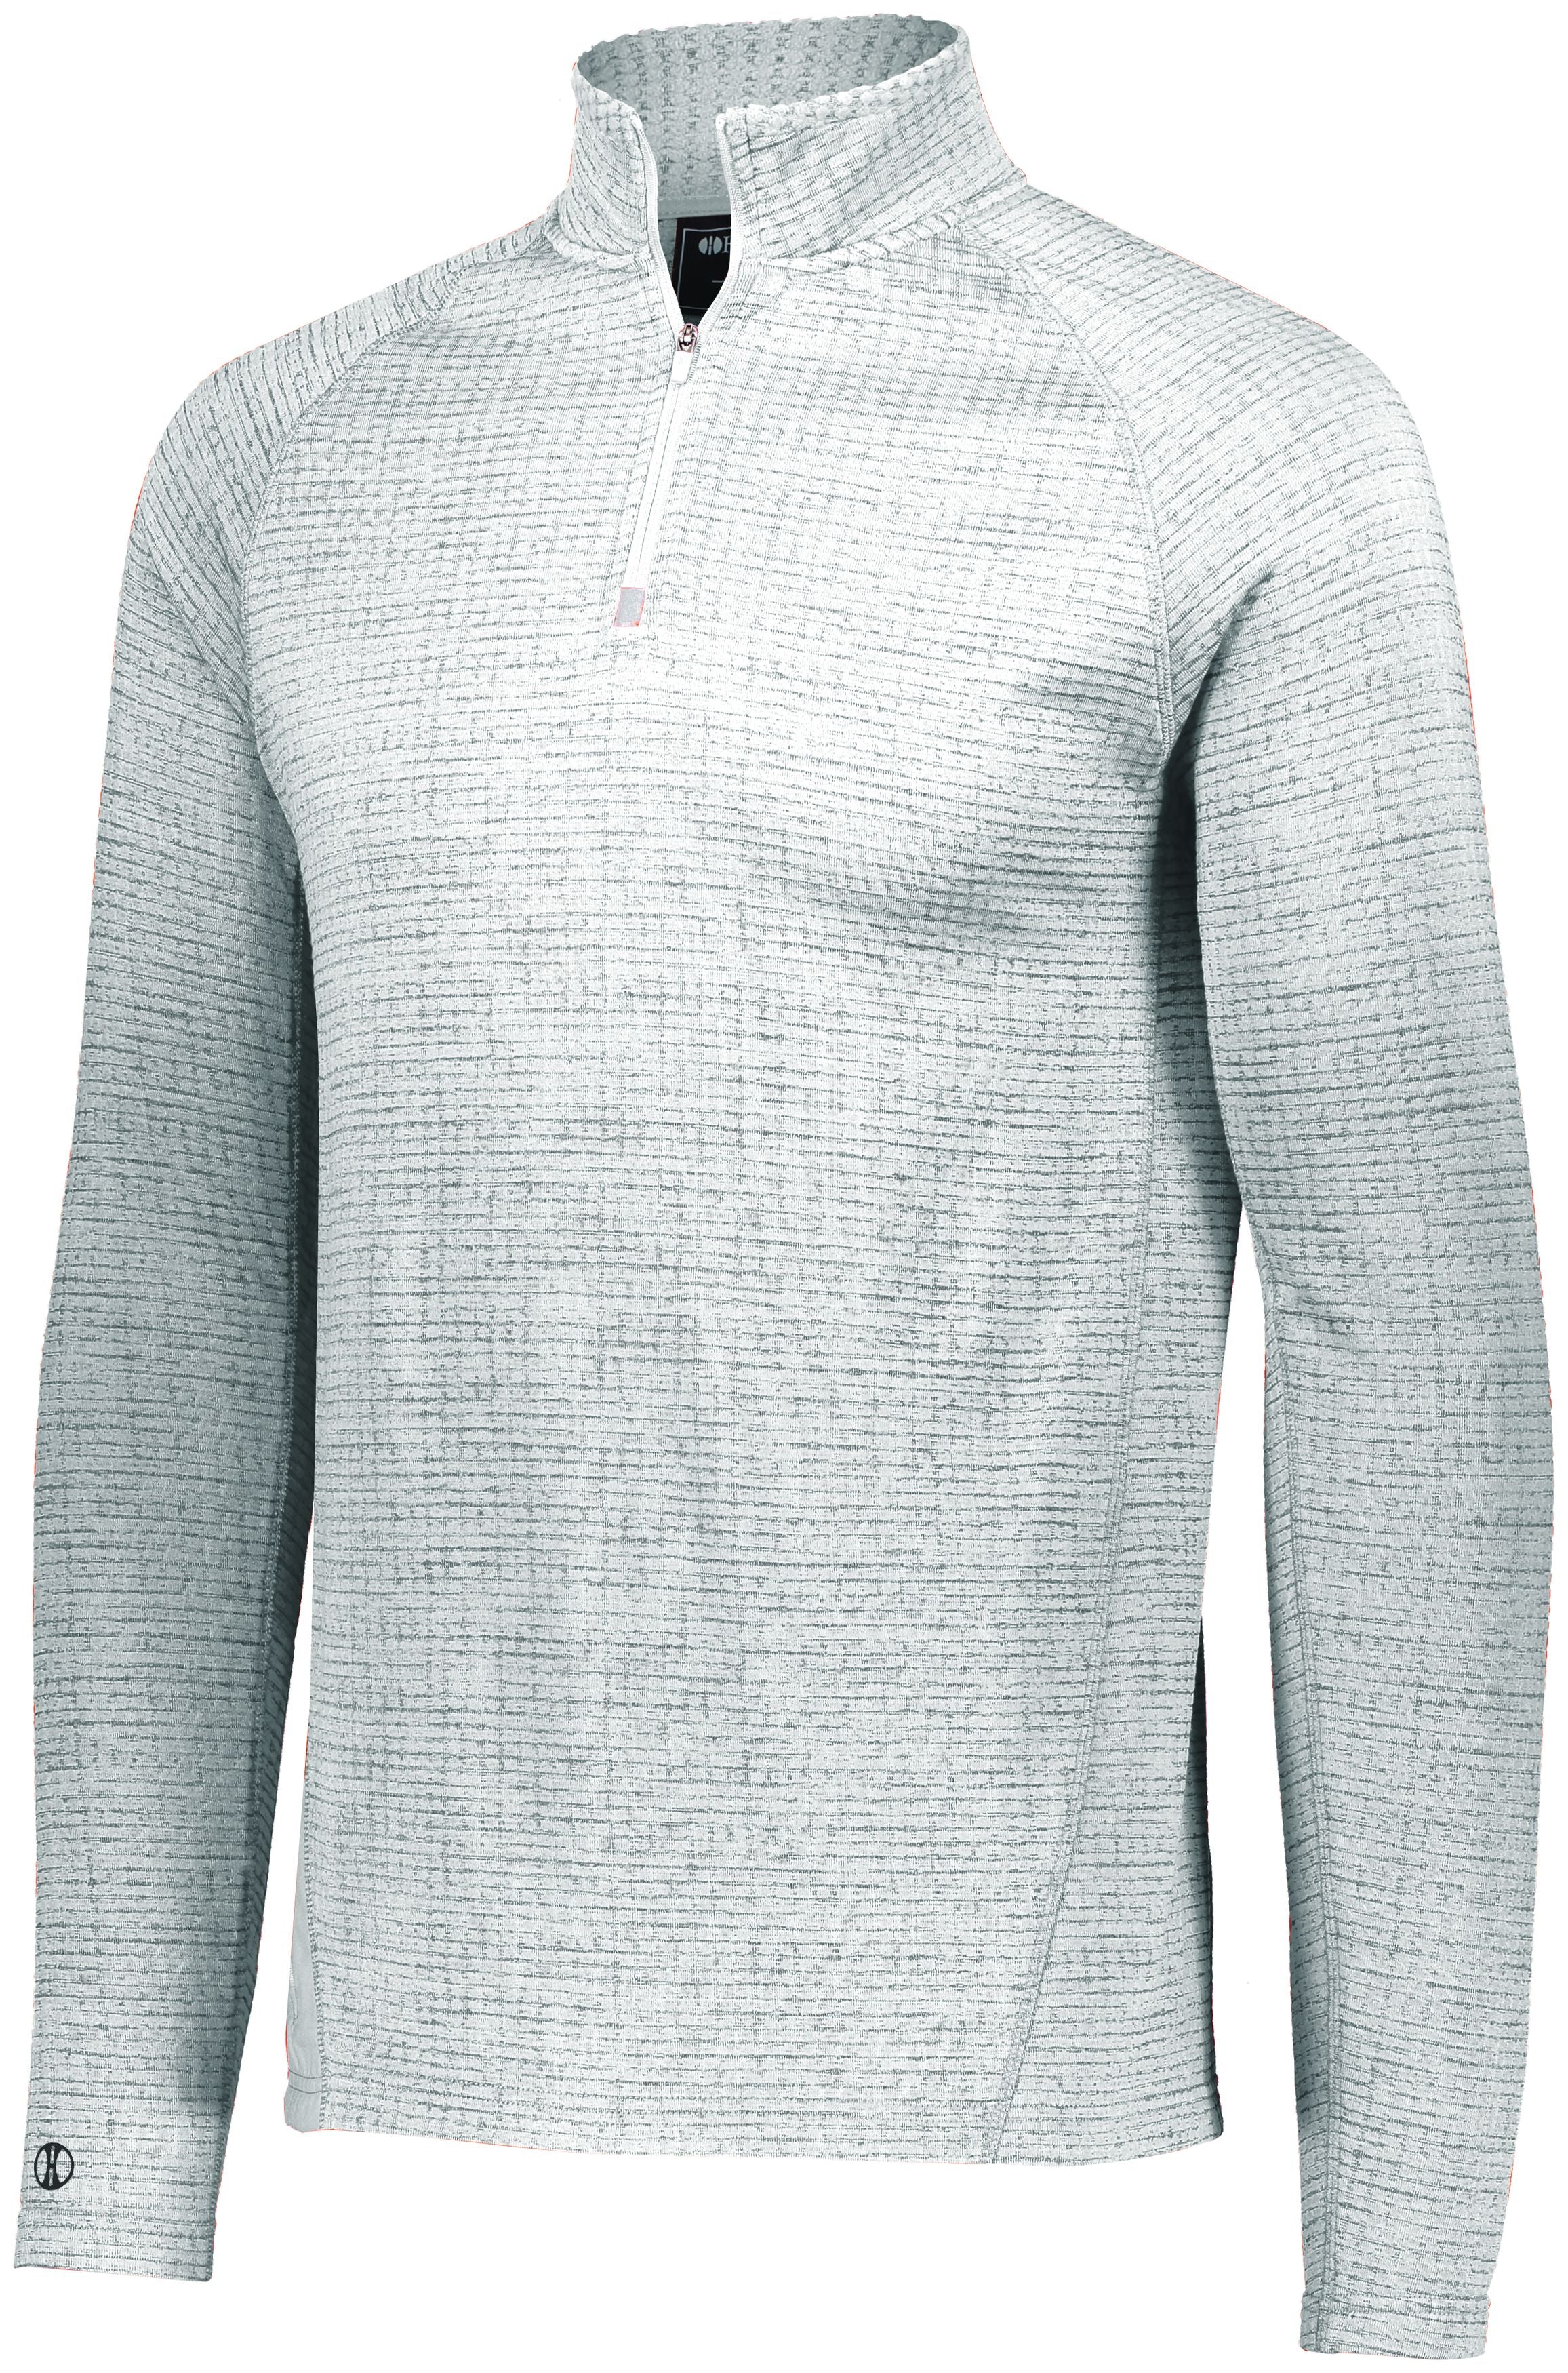 Holloway 3D Regulate Lightweight Pullover in White Heather  -Part of the Adult, Adult-Pullover, Holloway, Outerwear, 3D-Collection product lines at KanaleyCreations.com